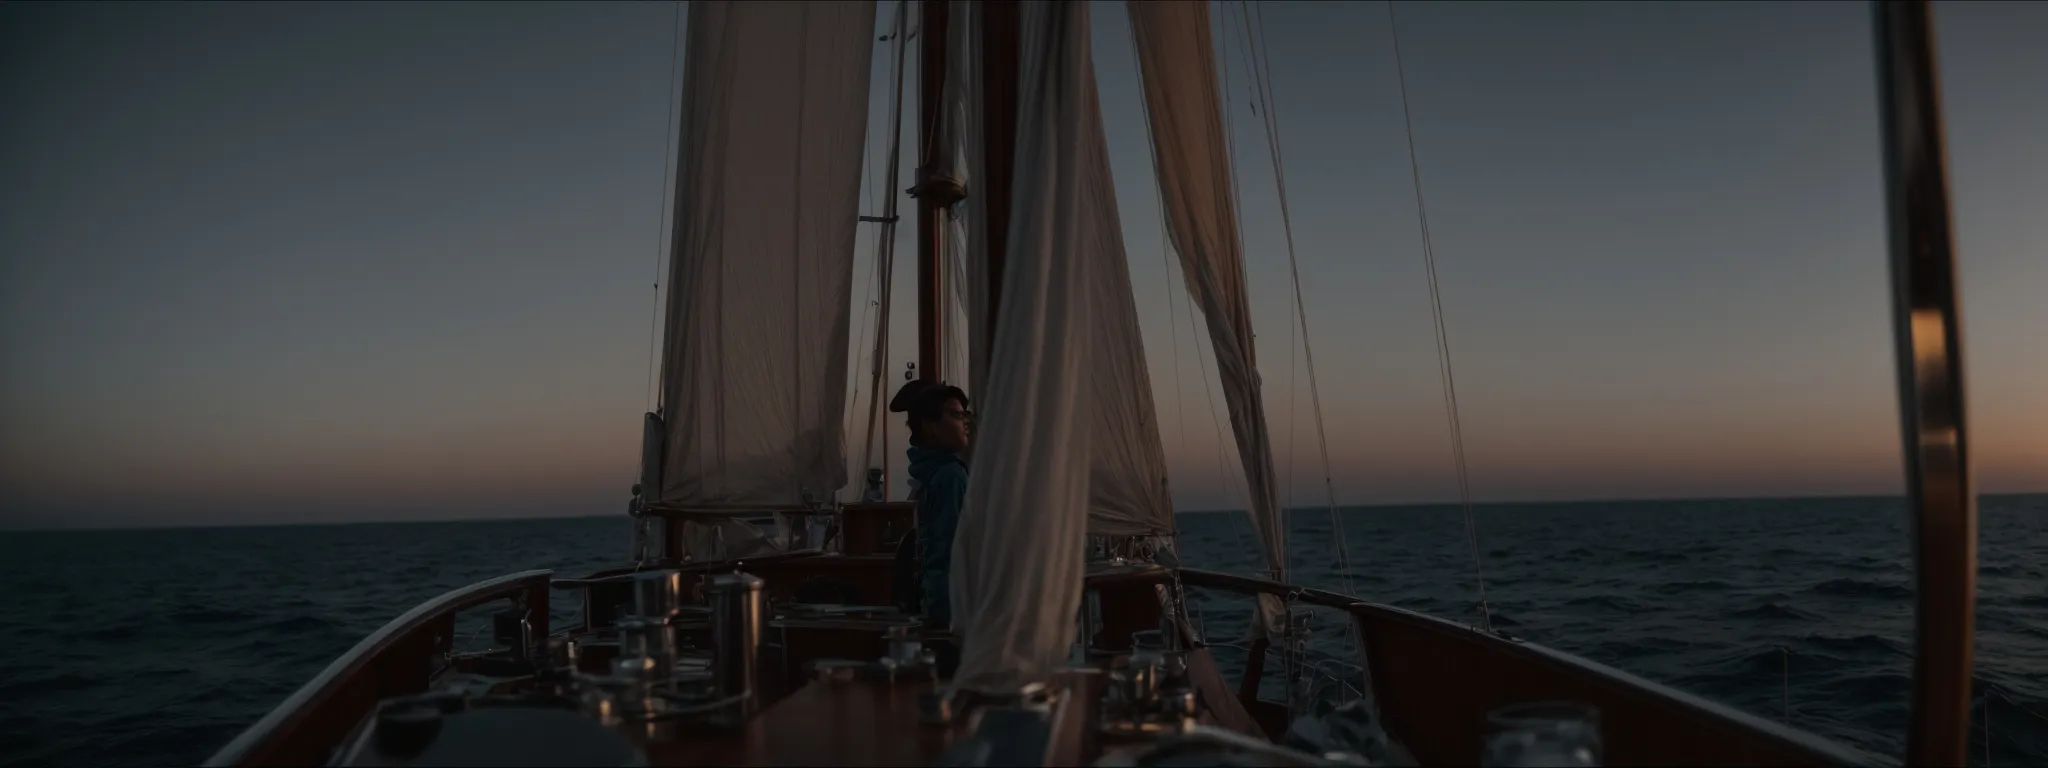 a person stands at the helm of a ship, gazing through a spyglass towards the horizon at dawn.